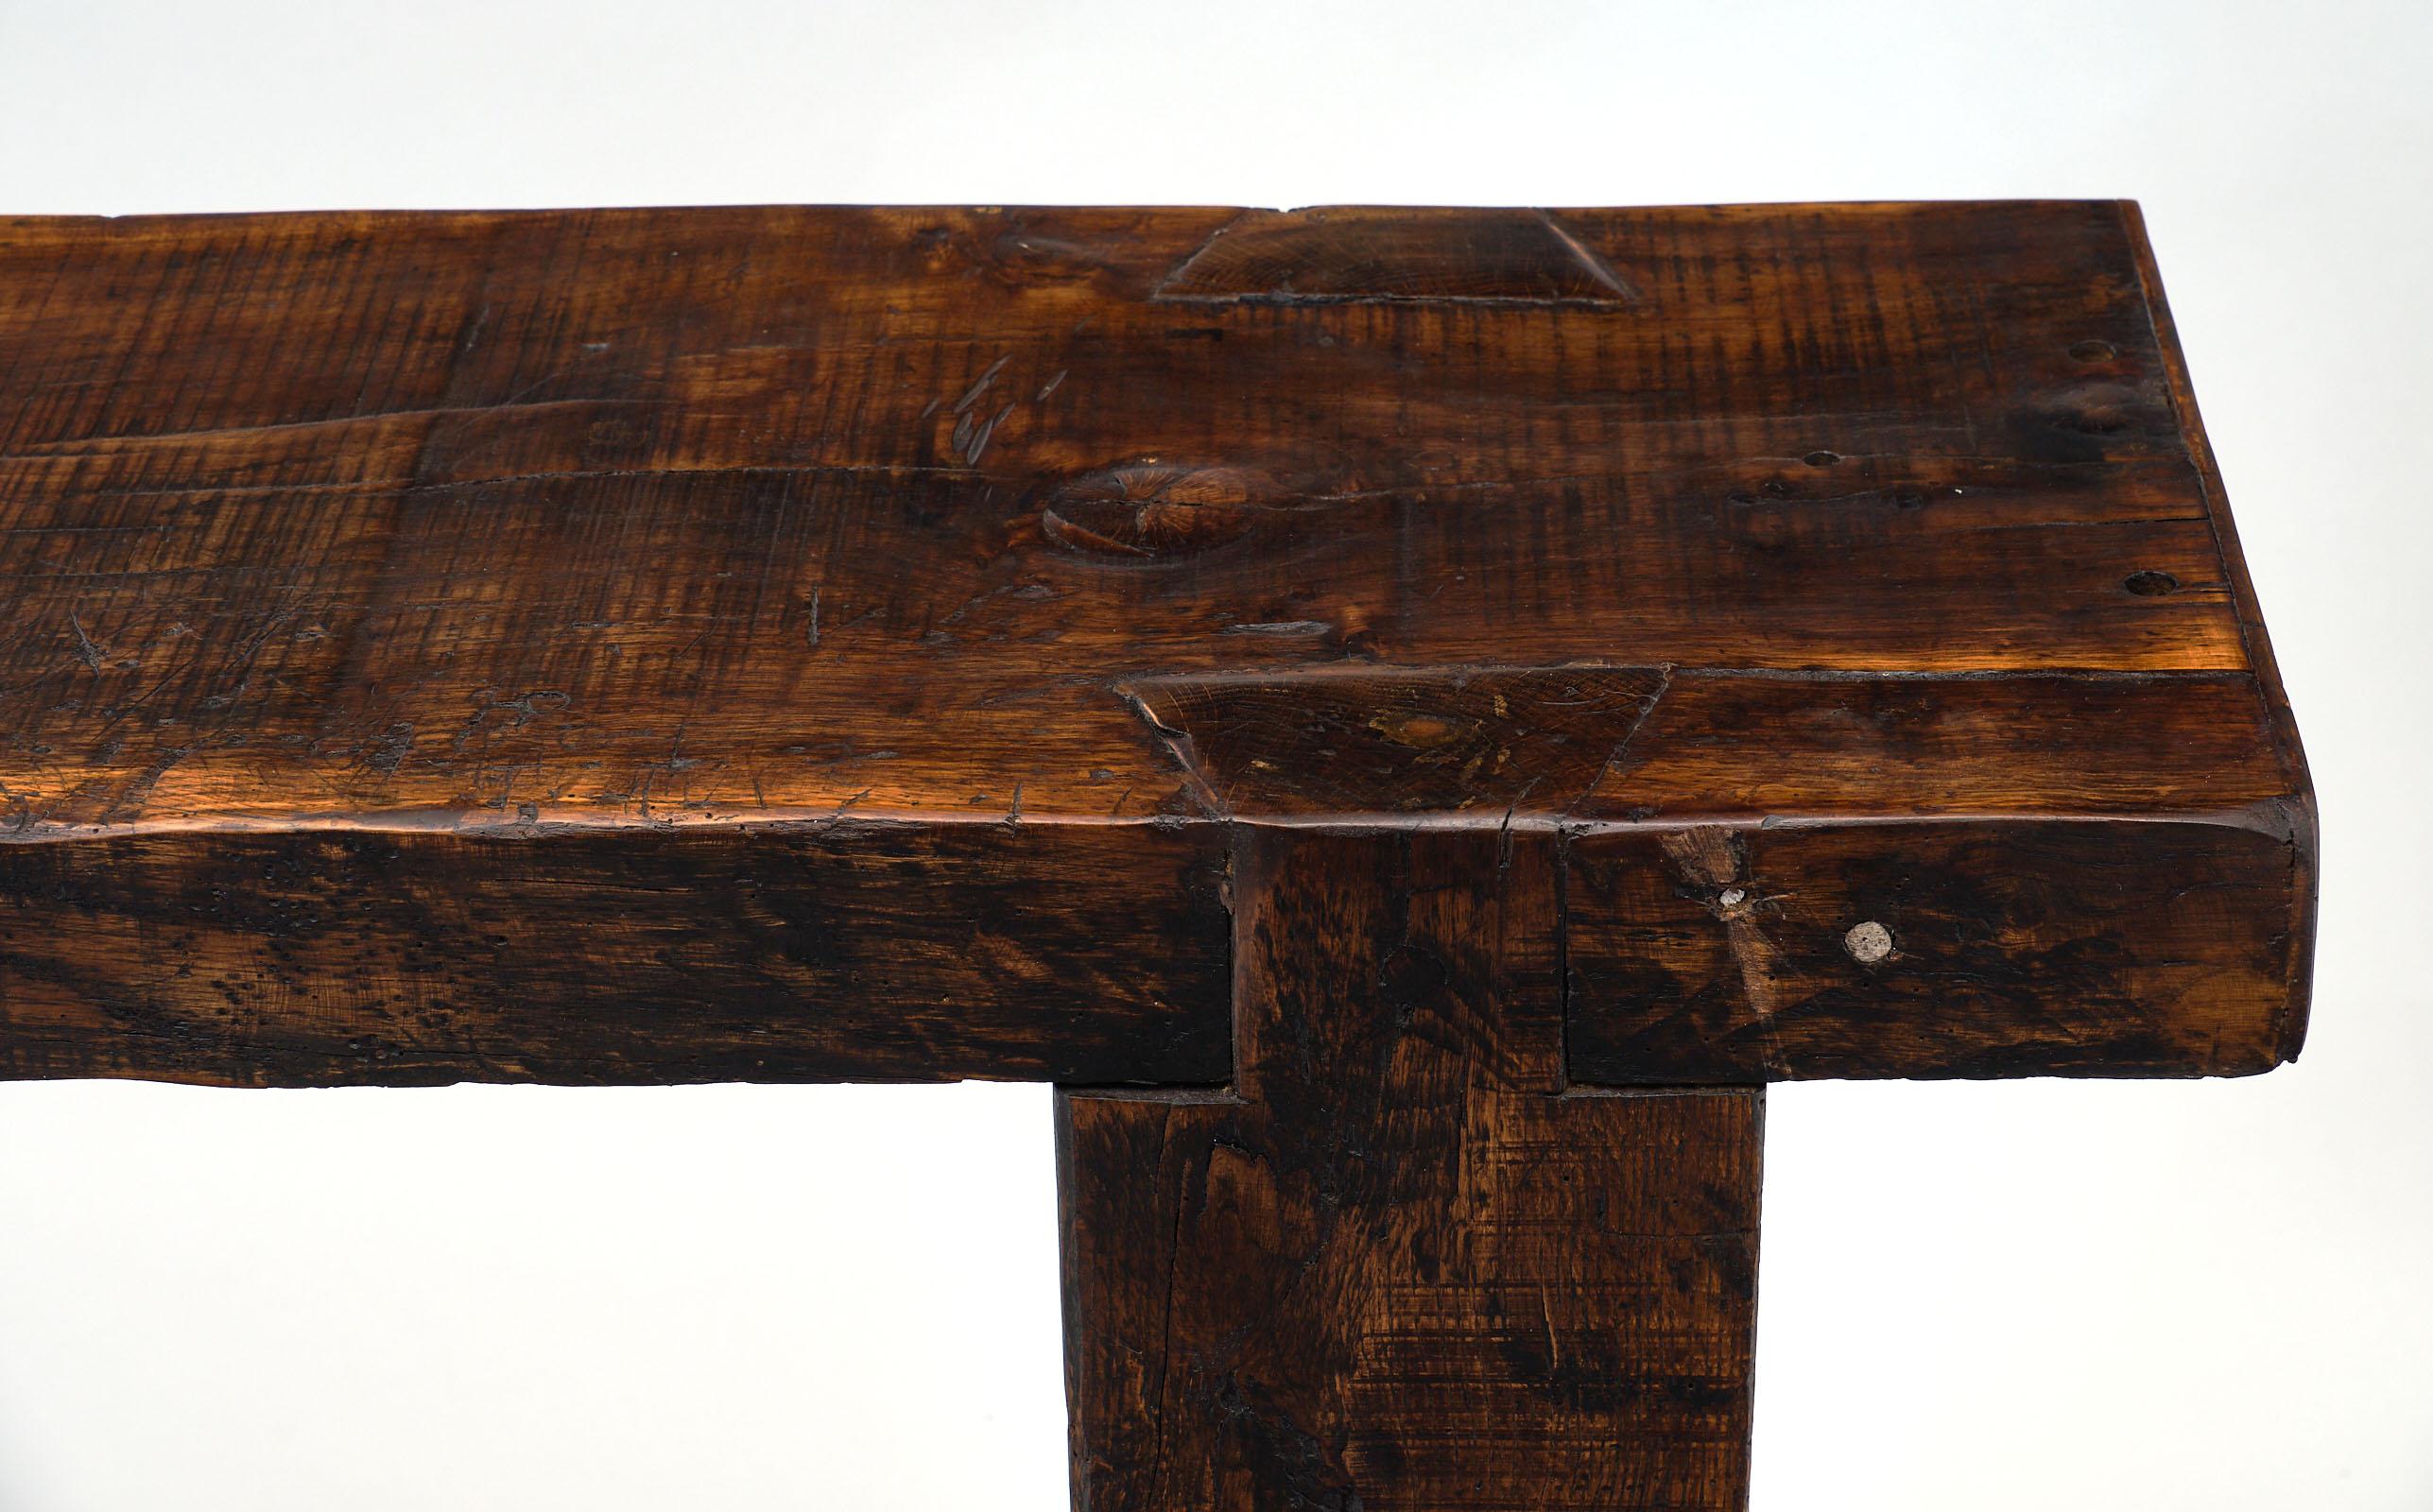 Chestnut antique French workbench with a strong single plank top from the Swiss Alps. This table is made of solid chestnut featuring its original vise and bottom shelf. There is lots of character to this excellent piece, perfect to enhance your city